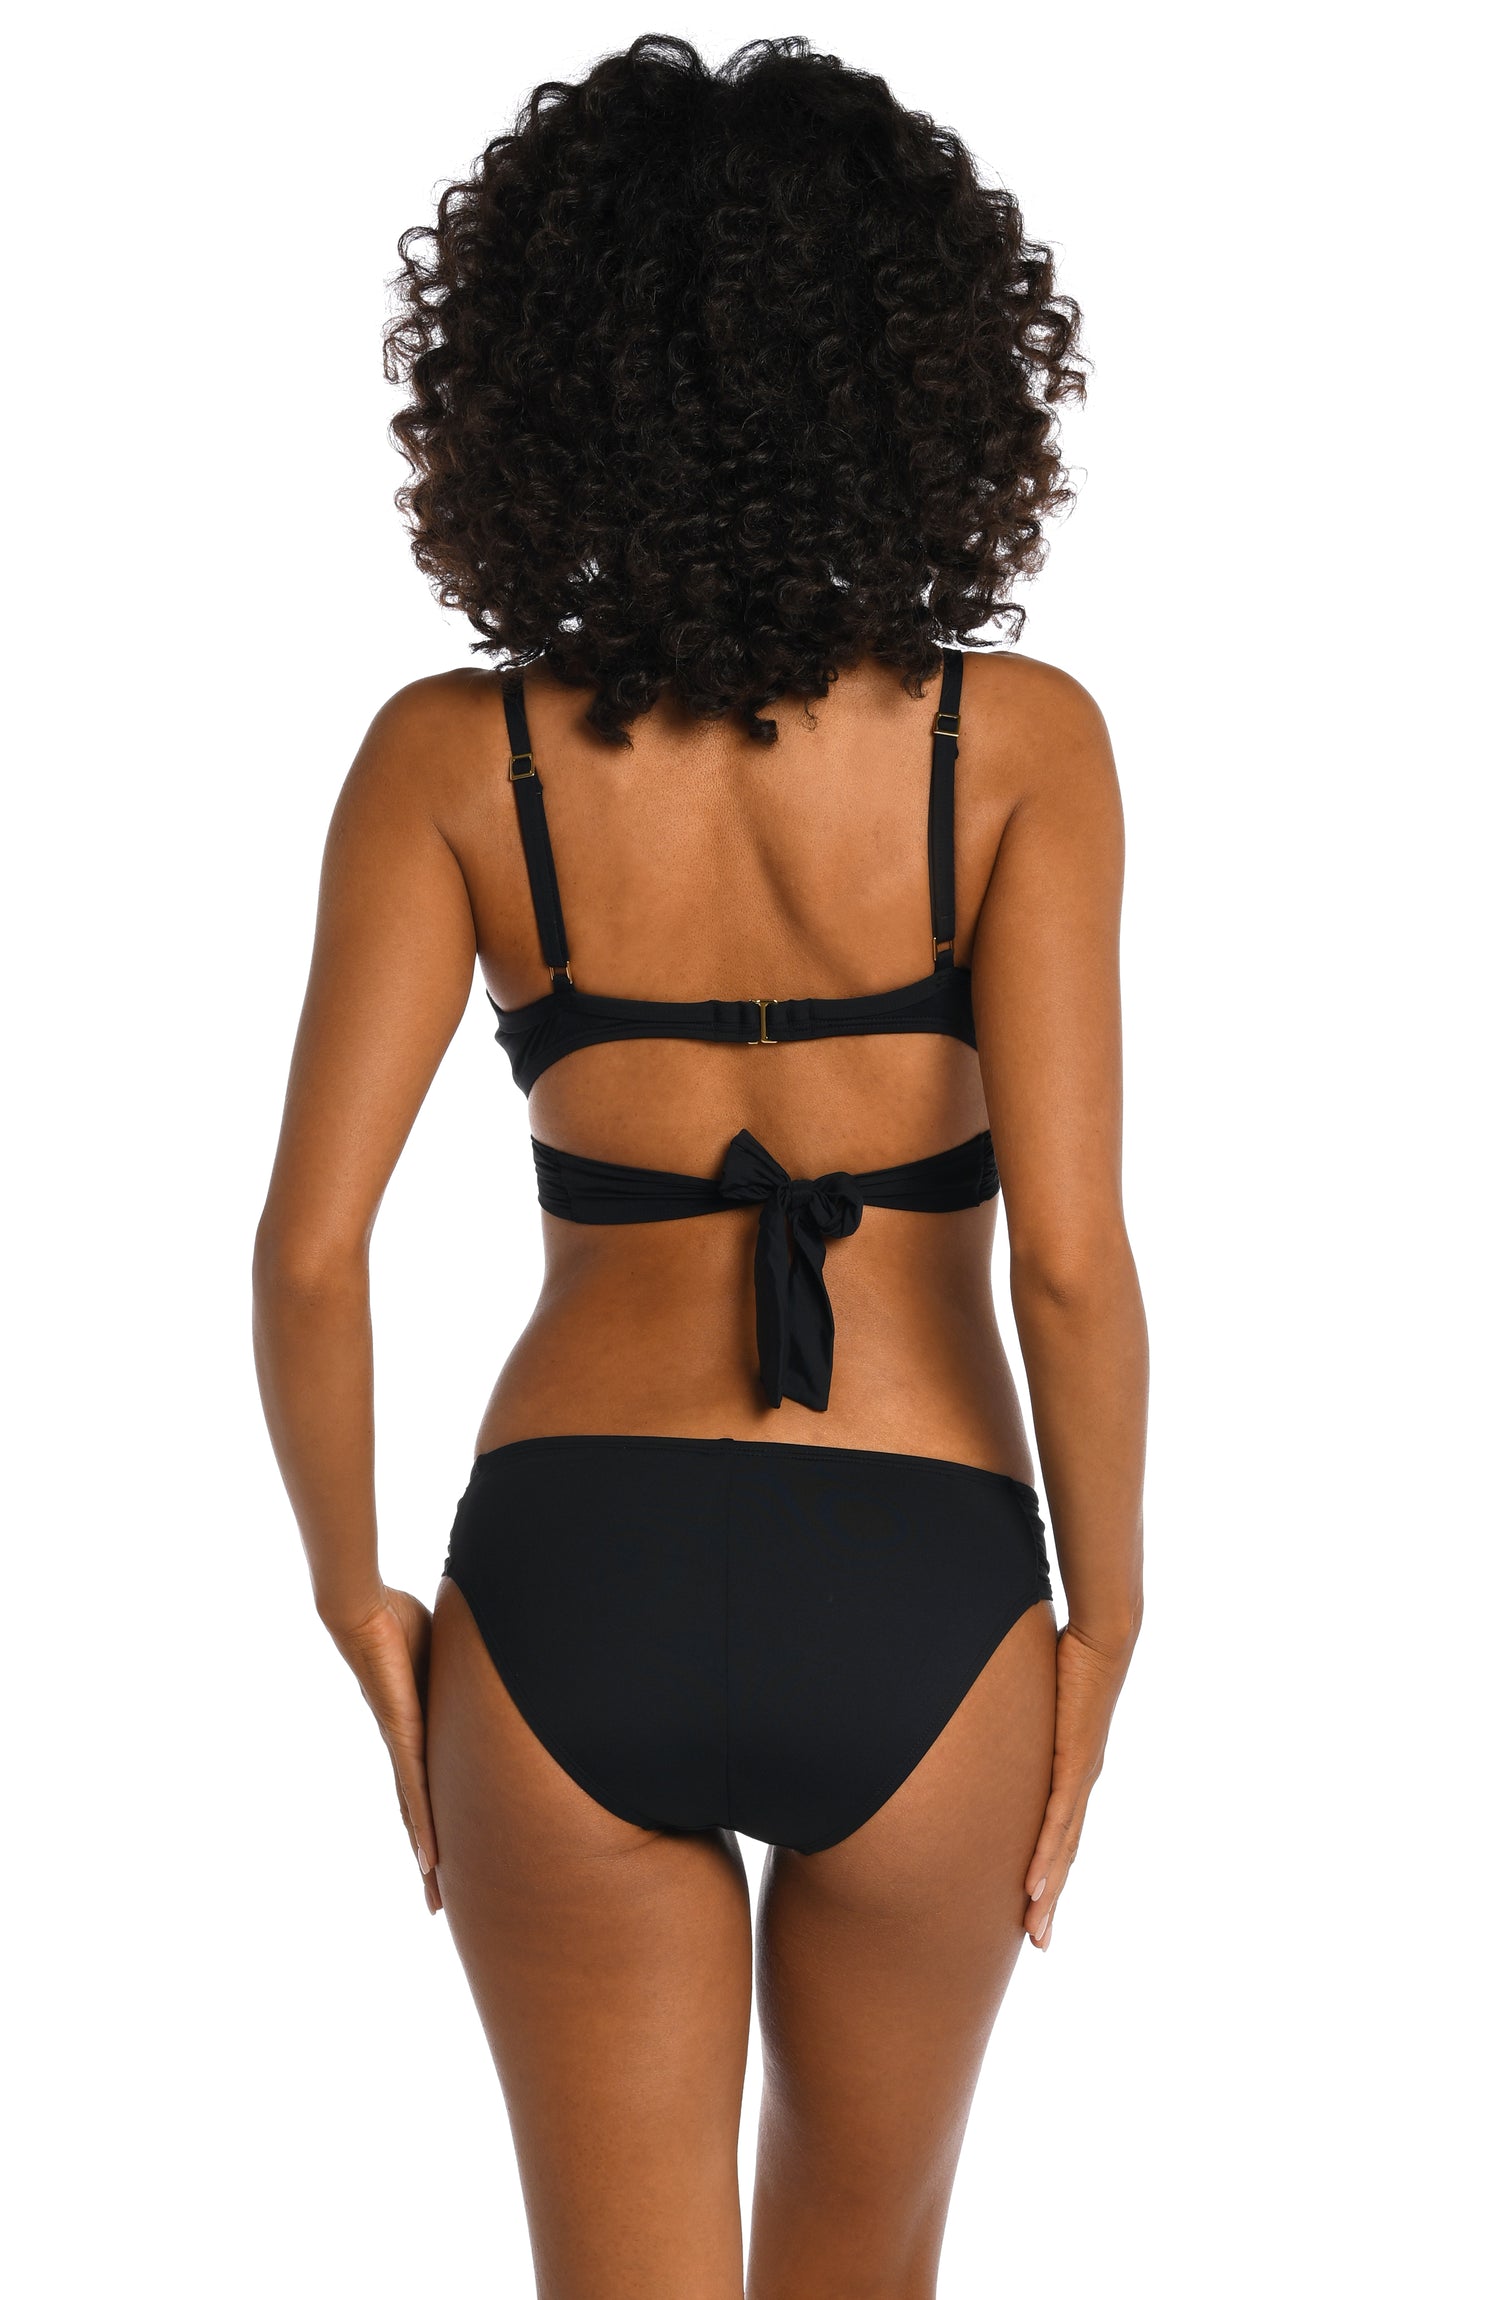 Model is wearing a black underwire bikini swimsuit top from our Best-Selling Island Goddess collection.